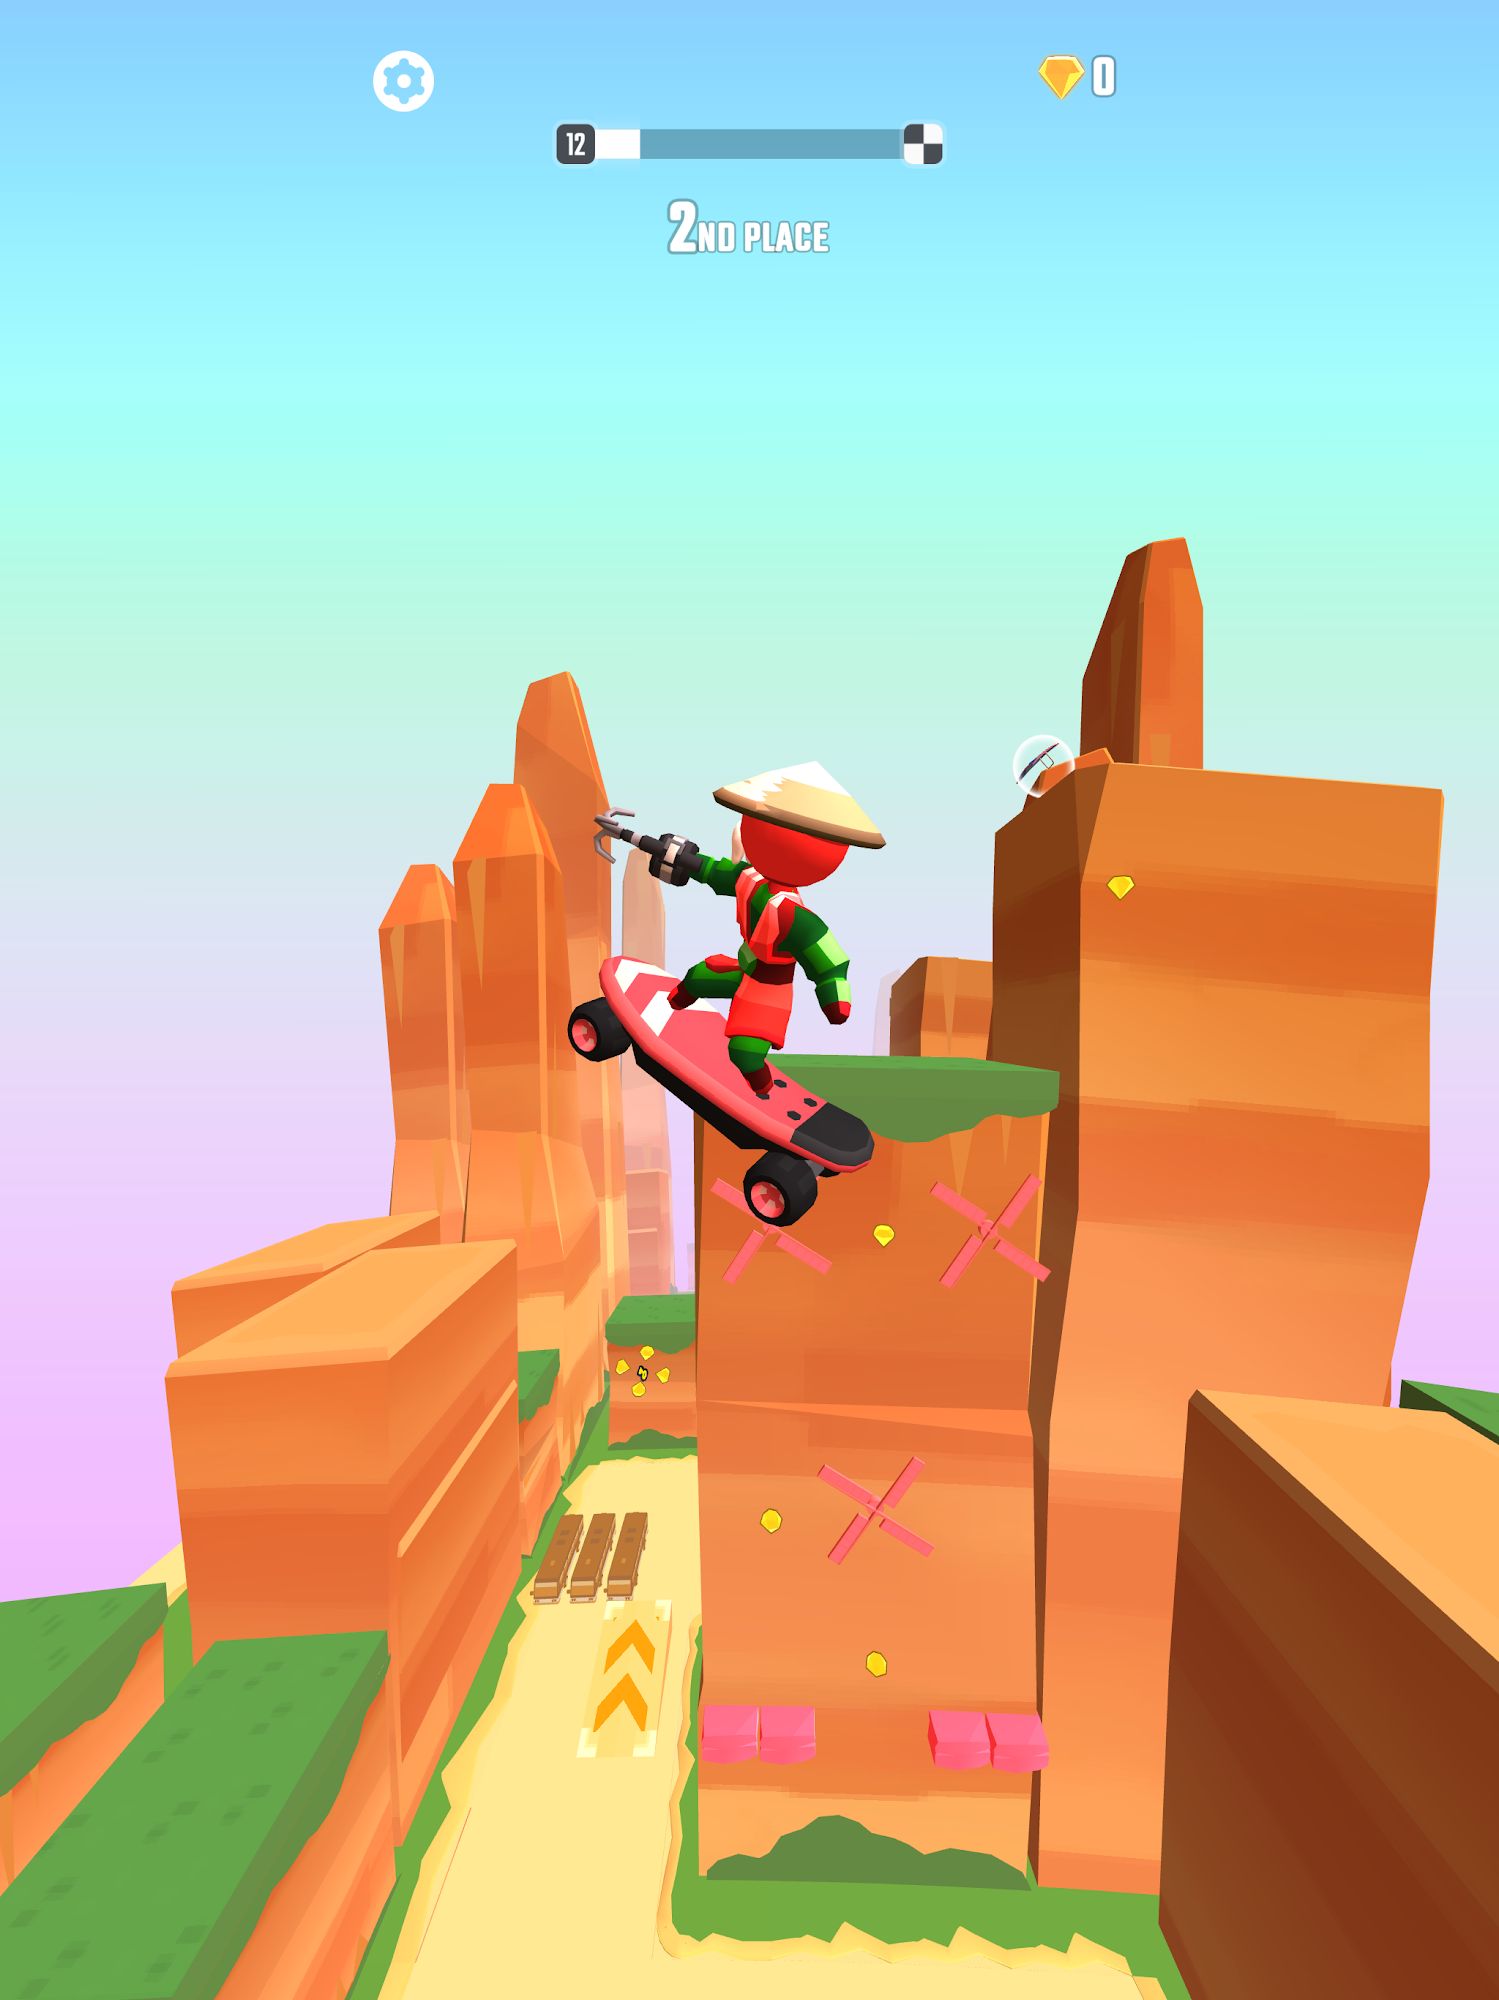 Swing Loops - Grapple Hook Race for Android